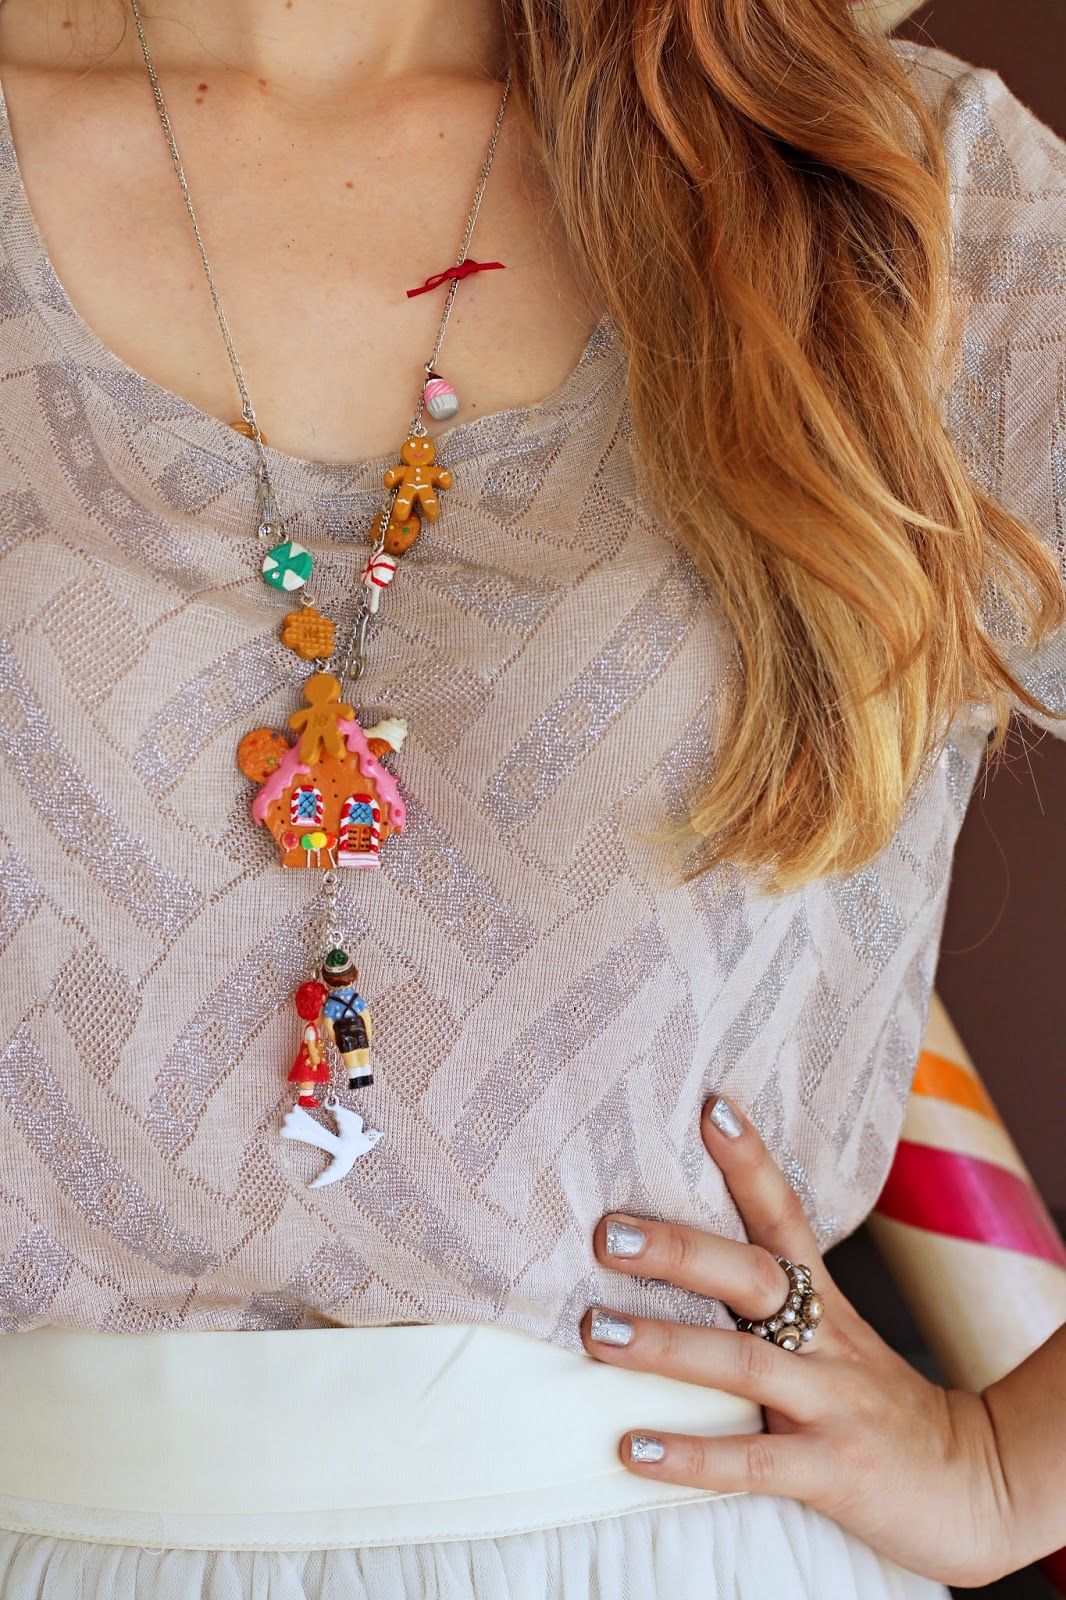 Adorable Hansel and Gretel inspired necklace!